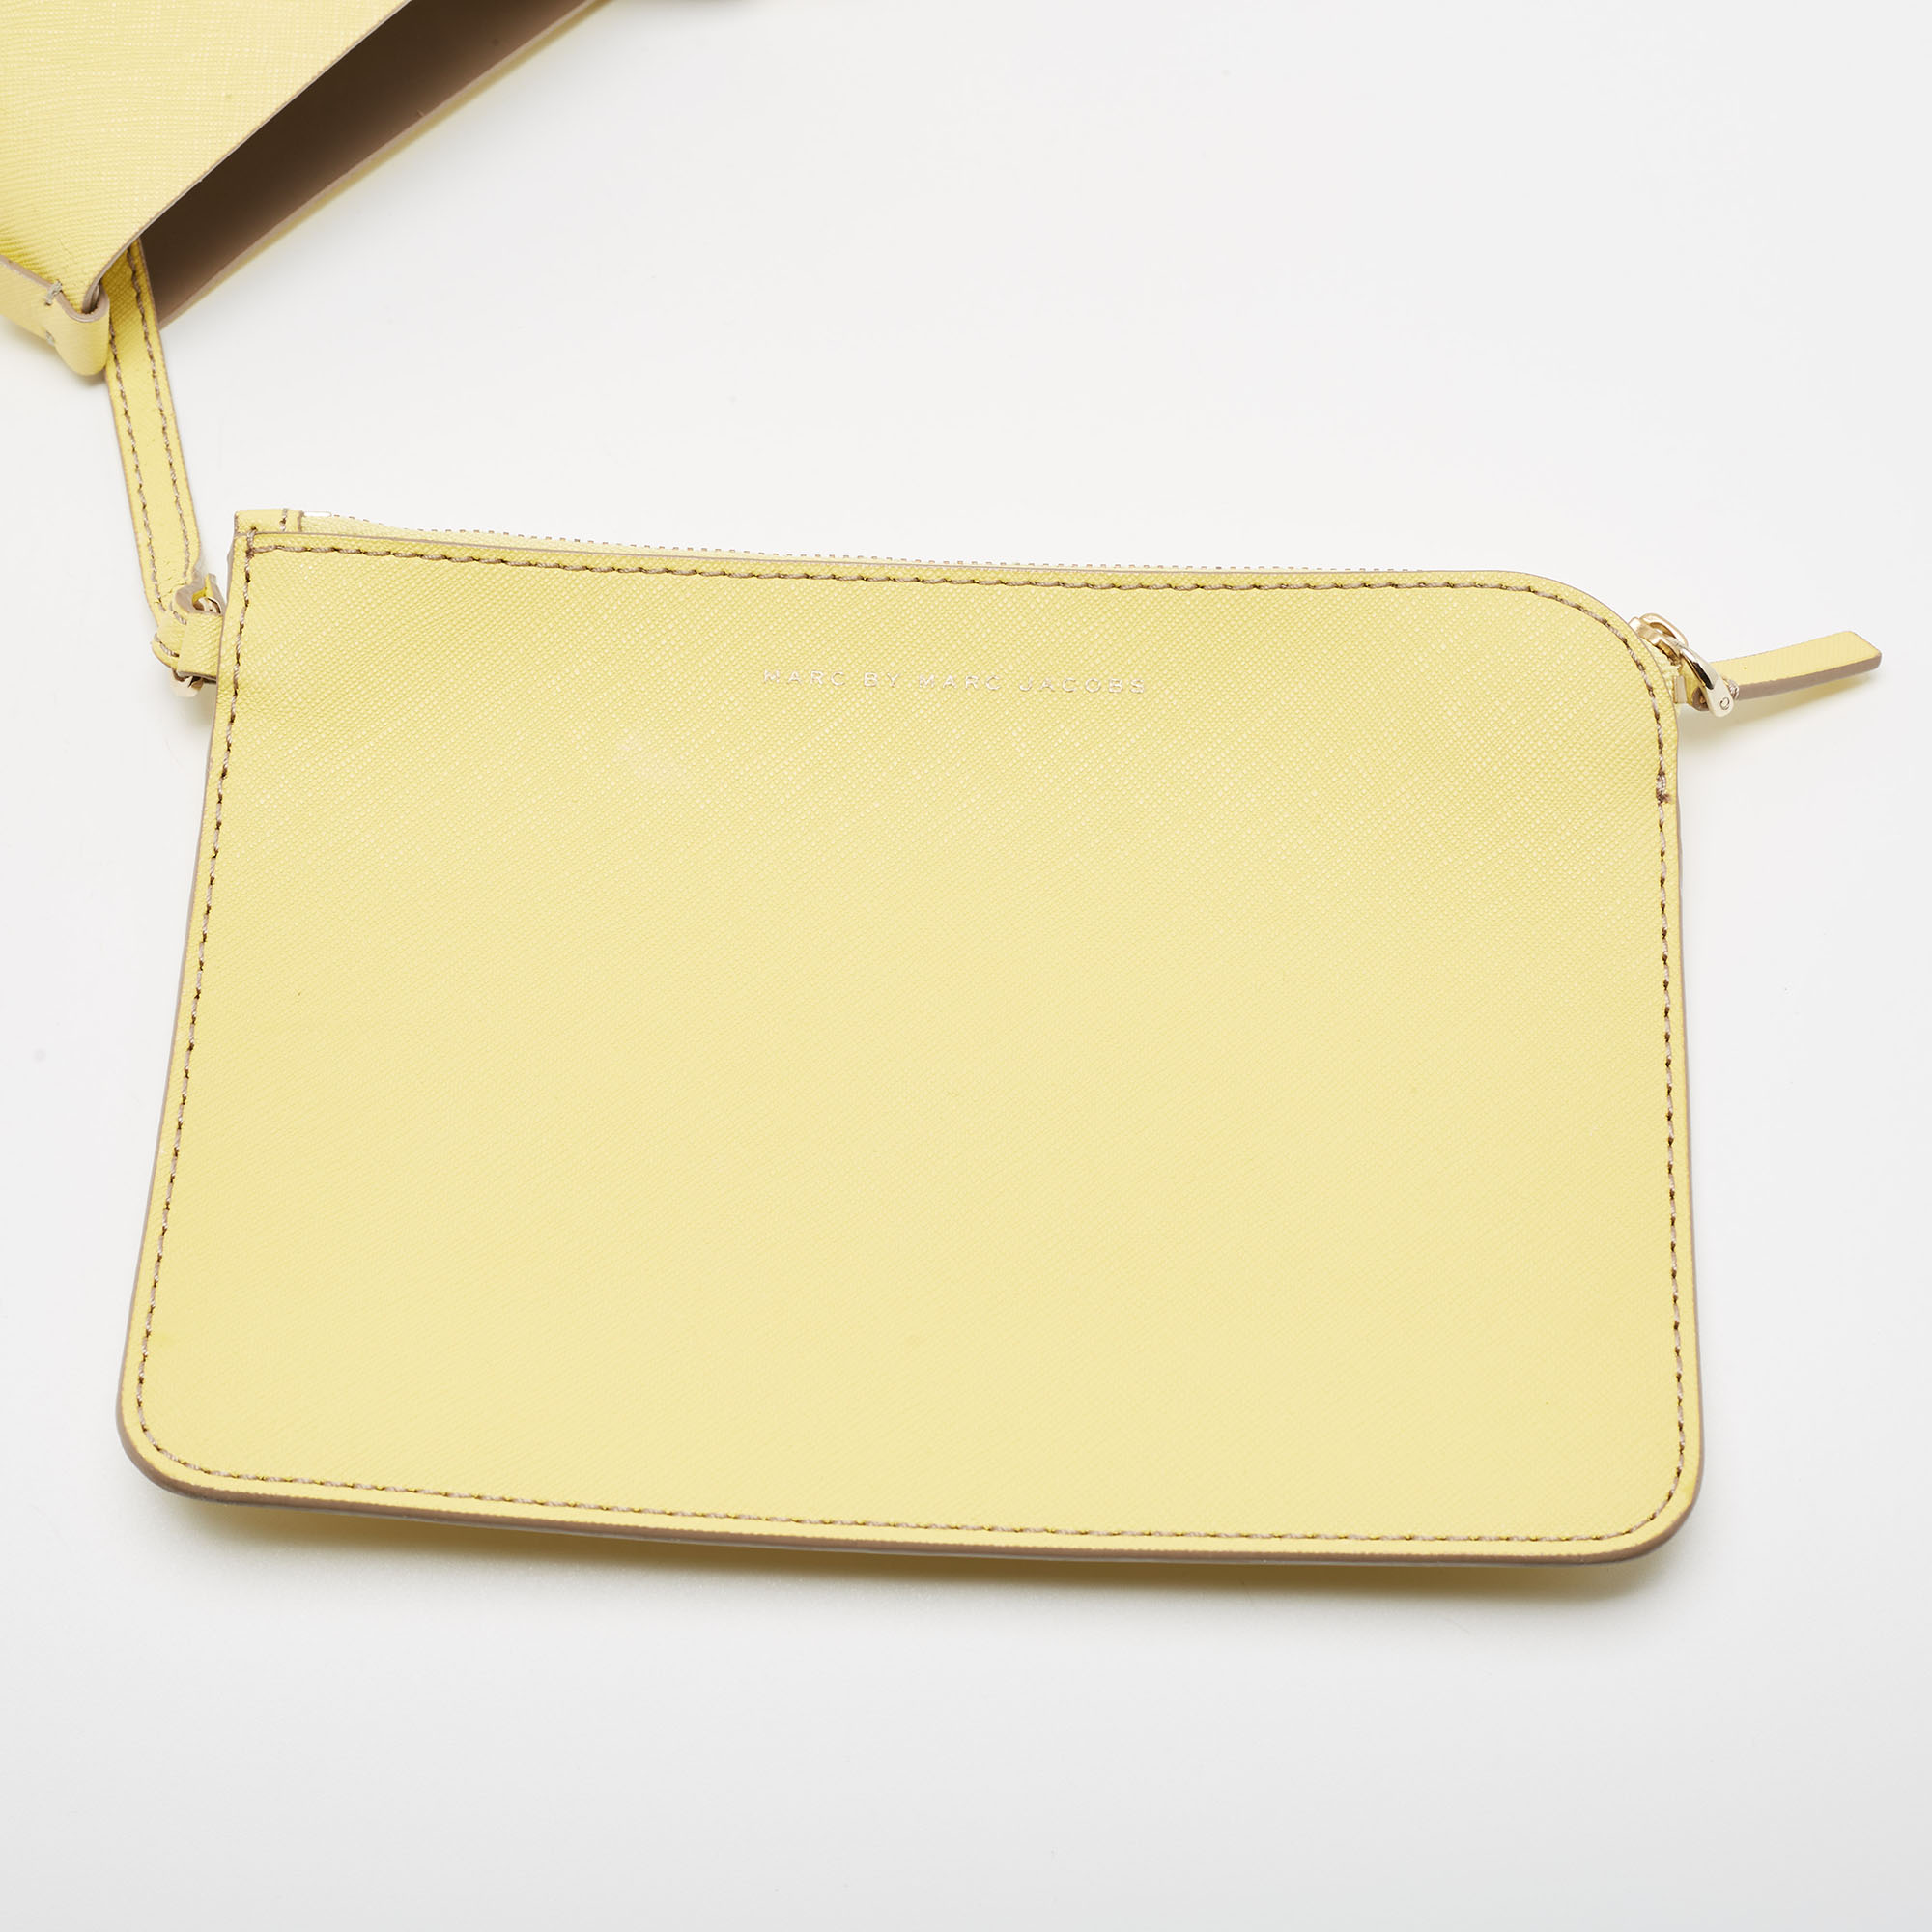 Marc By Marc Jacobs Yellow Leather Shopper Tote